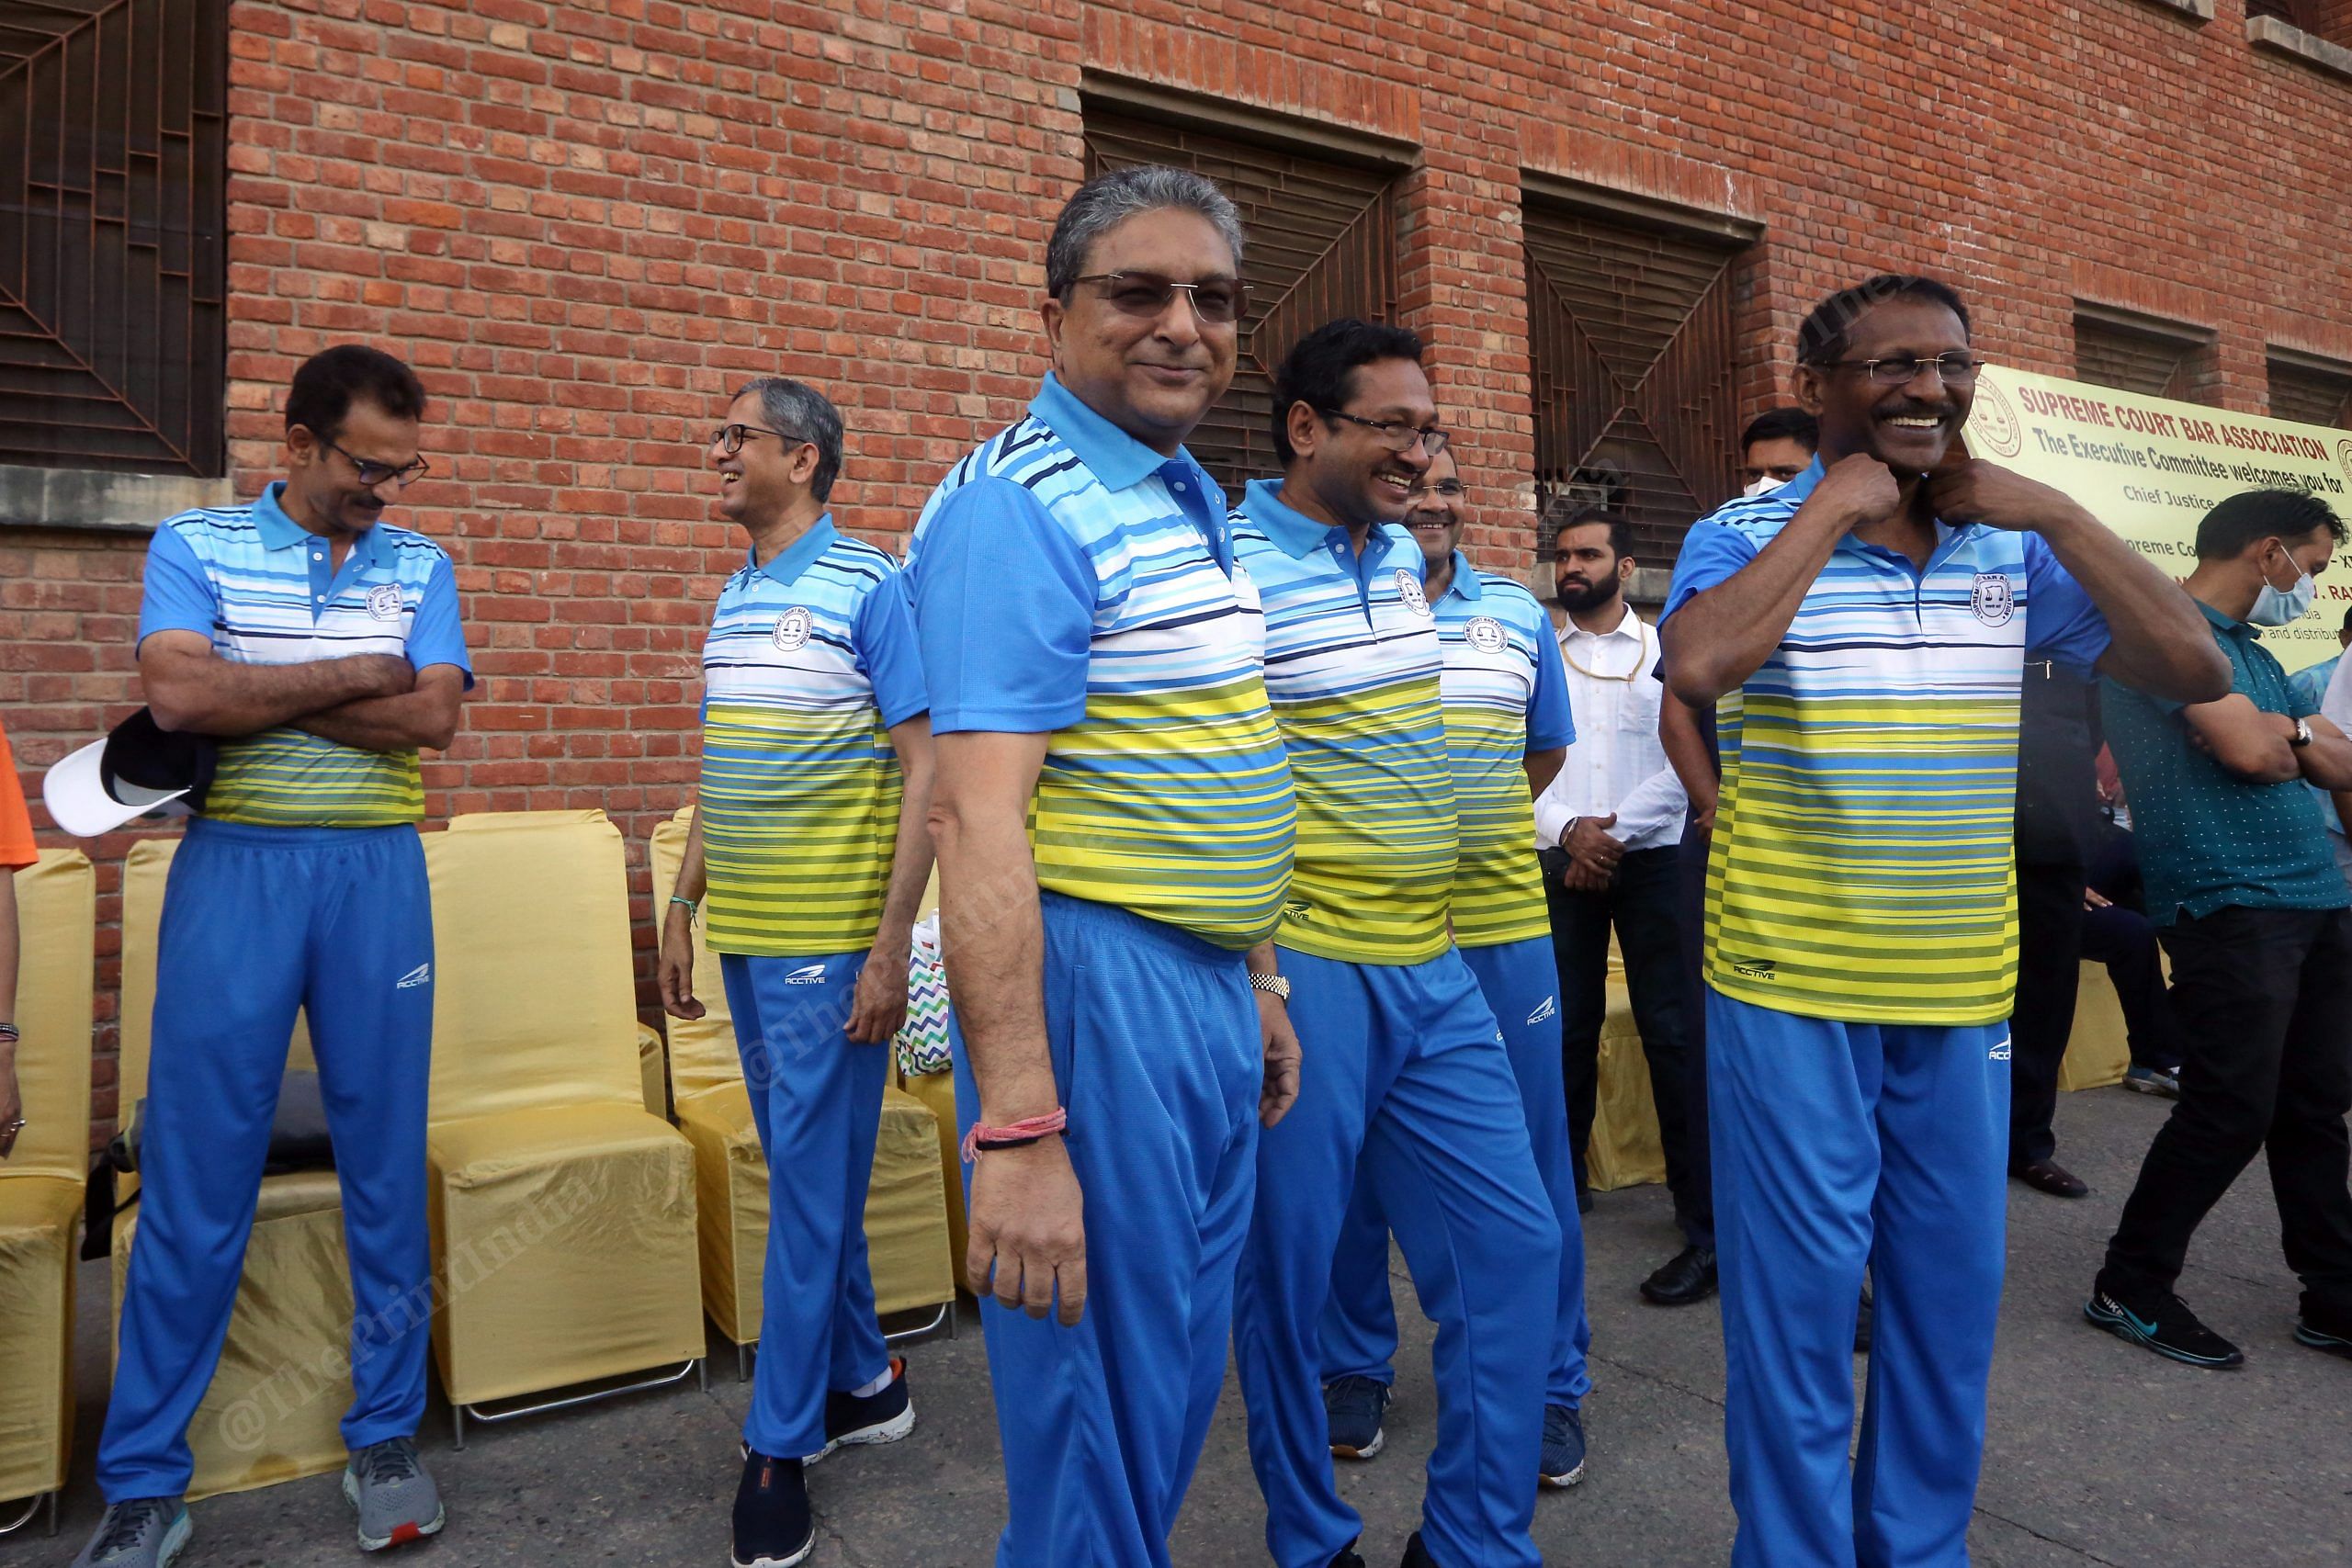 Left to Right: Justice L. Nageswara Rao, Chief Justice of India N.V. Ramana, Justice Vineet Saran, Justice M. M. Sundresh, and Justice C. T. Ravi Kumar getting ready for the match | Photo: Praveen Jain | ThePrint